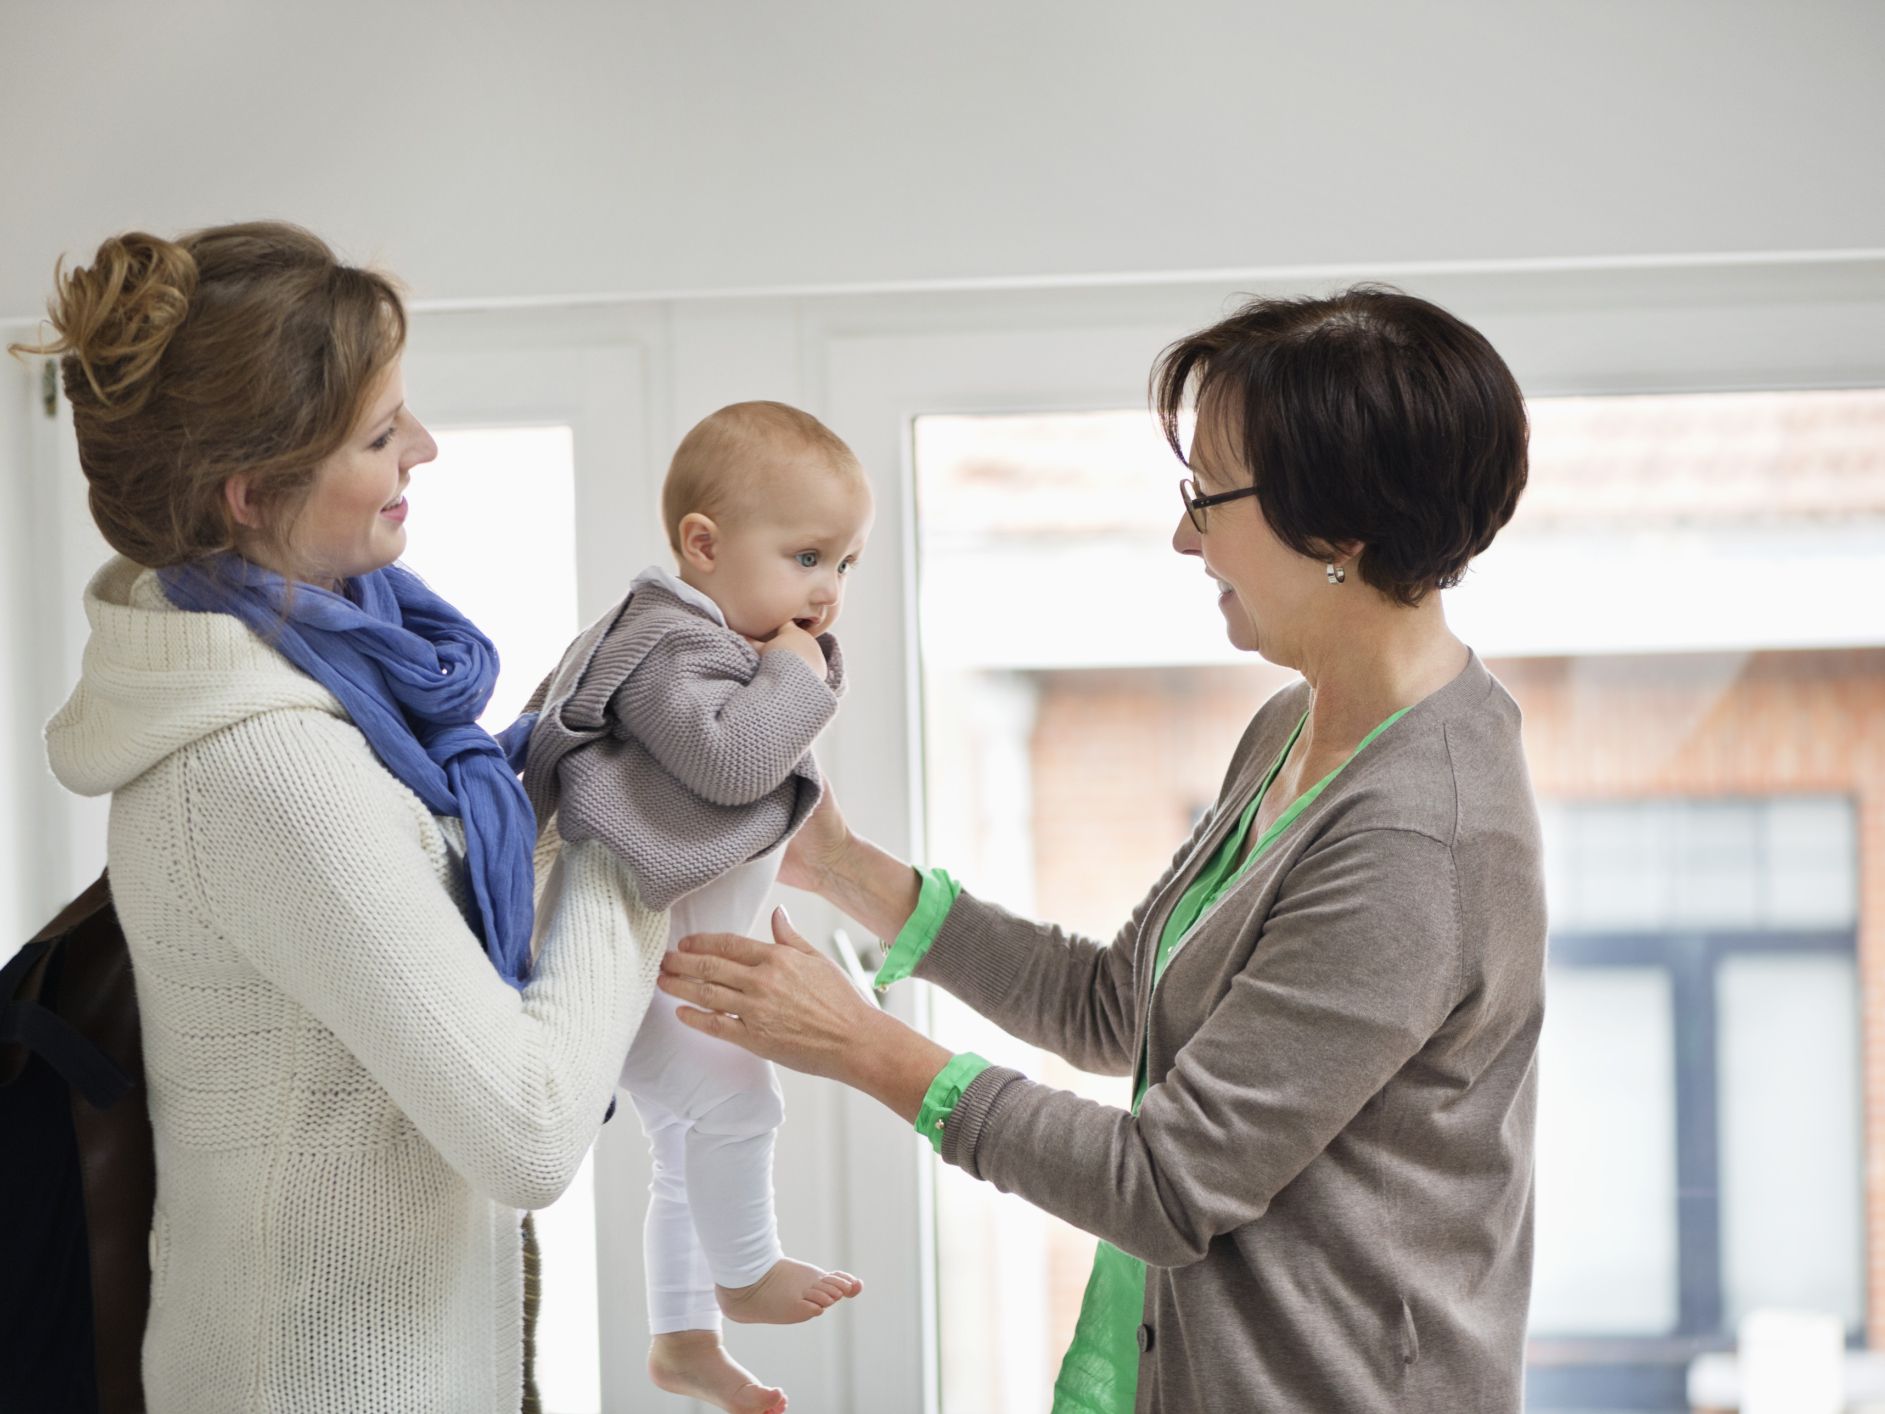 An insight into home nursing and nanny service providers